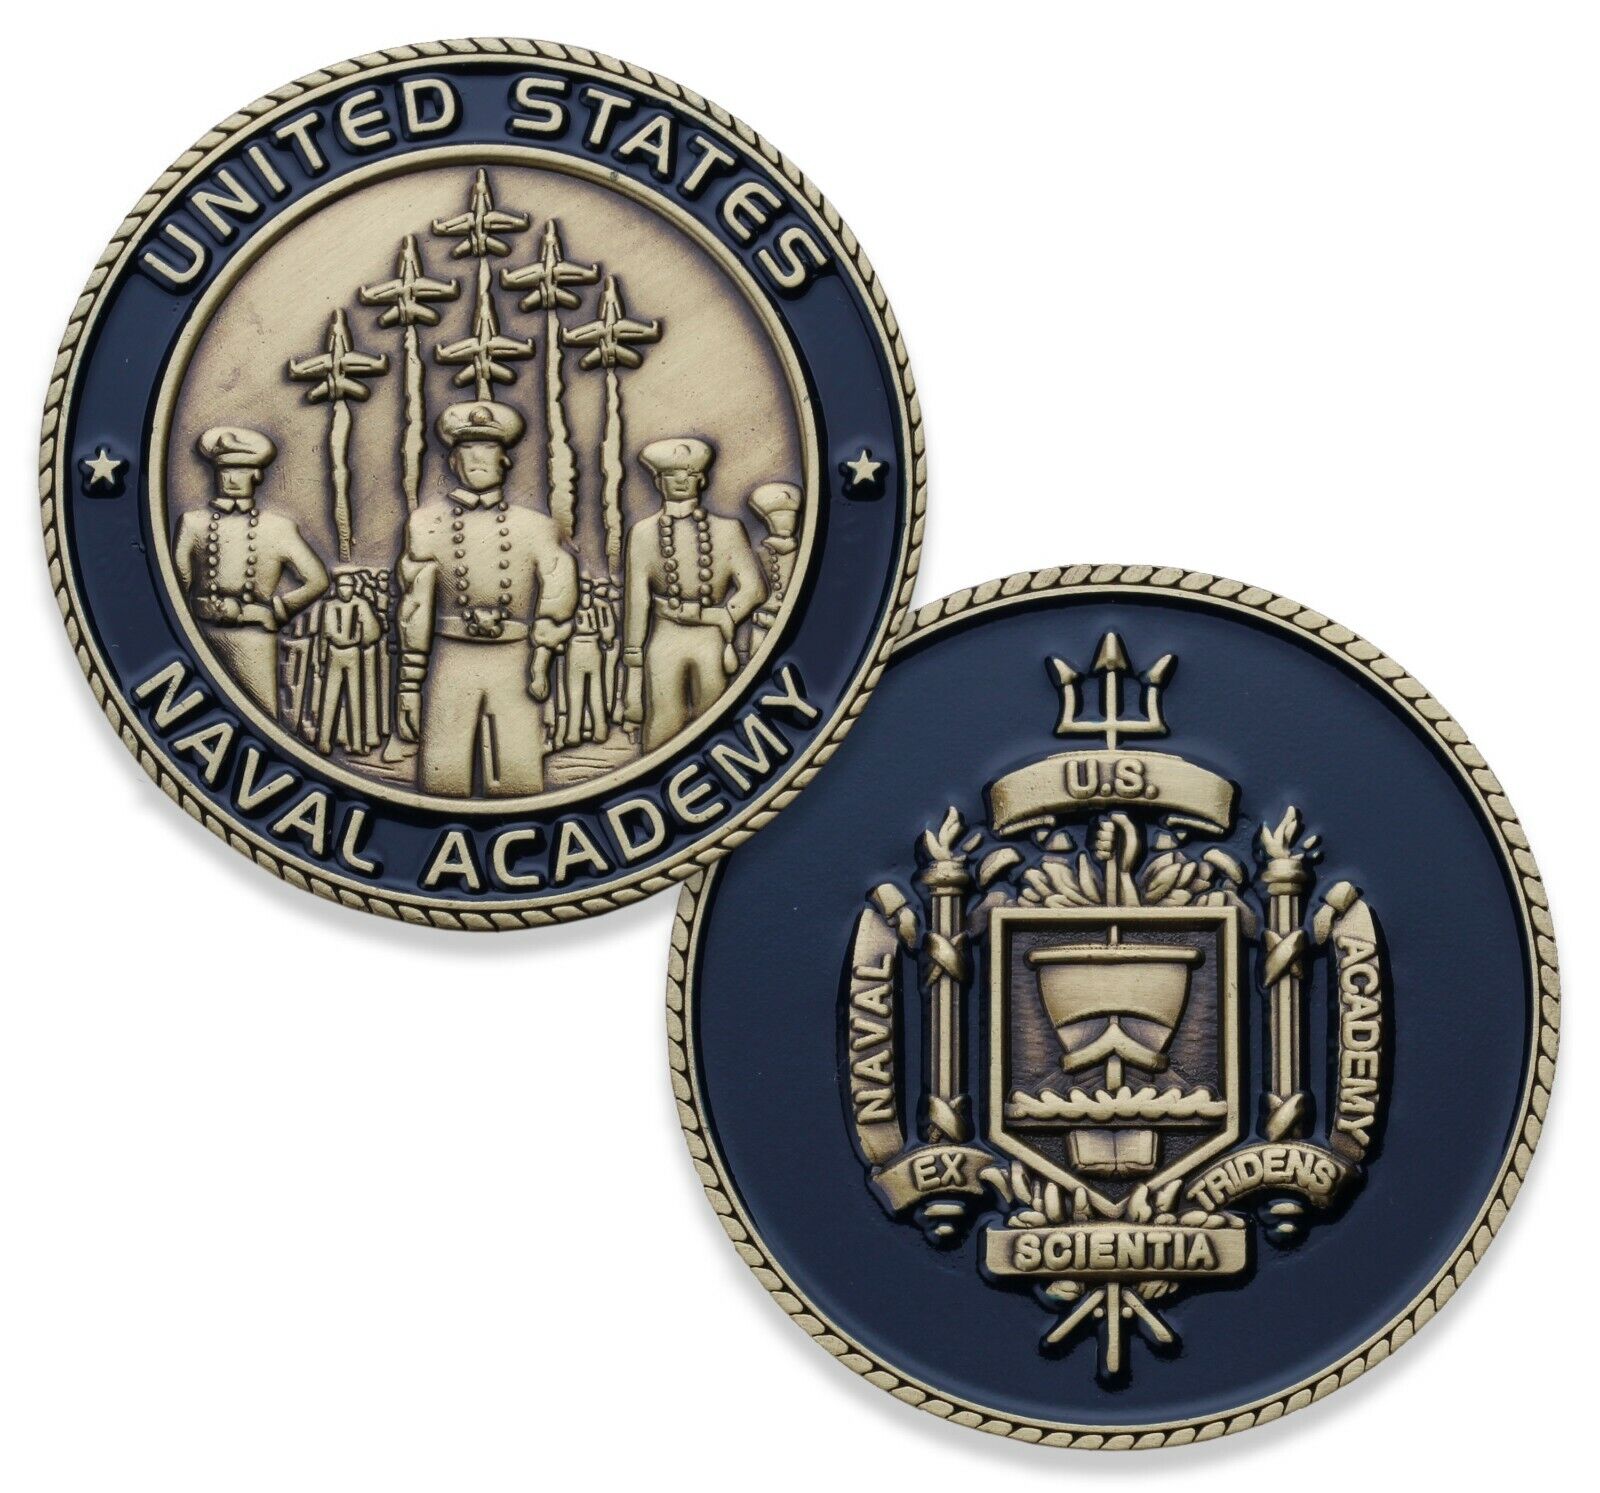 United States Navy Naval Academy Challenge Coin - Made by Coins For Anything